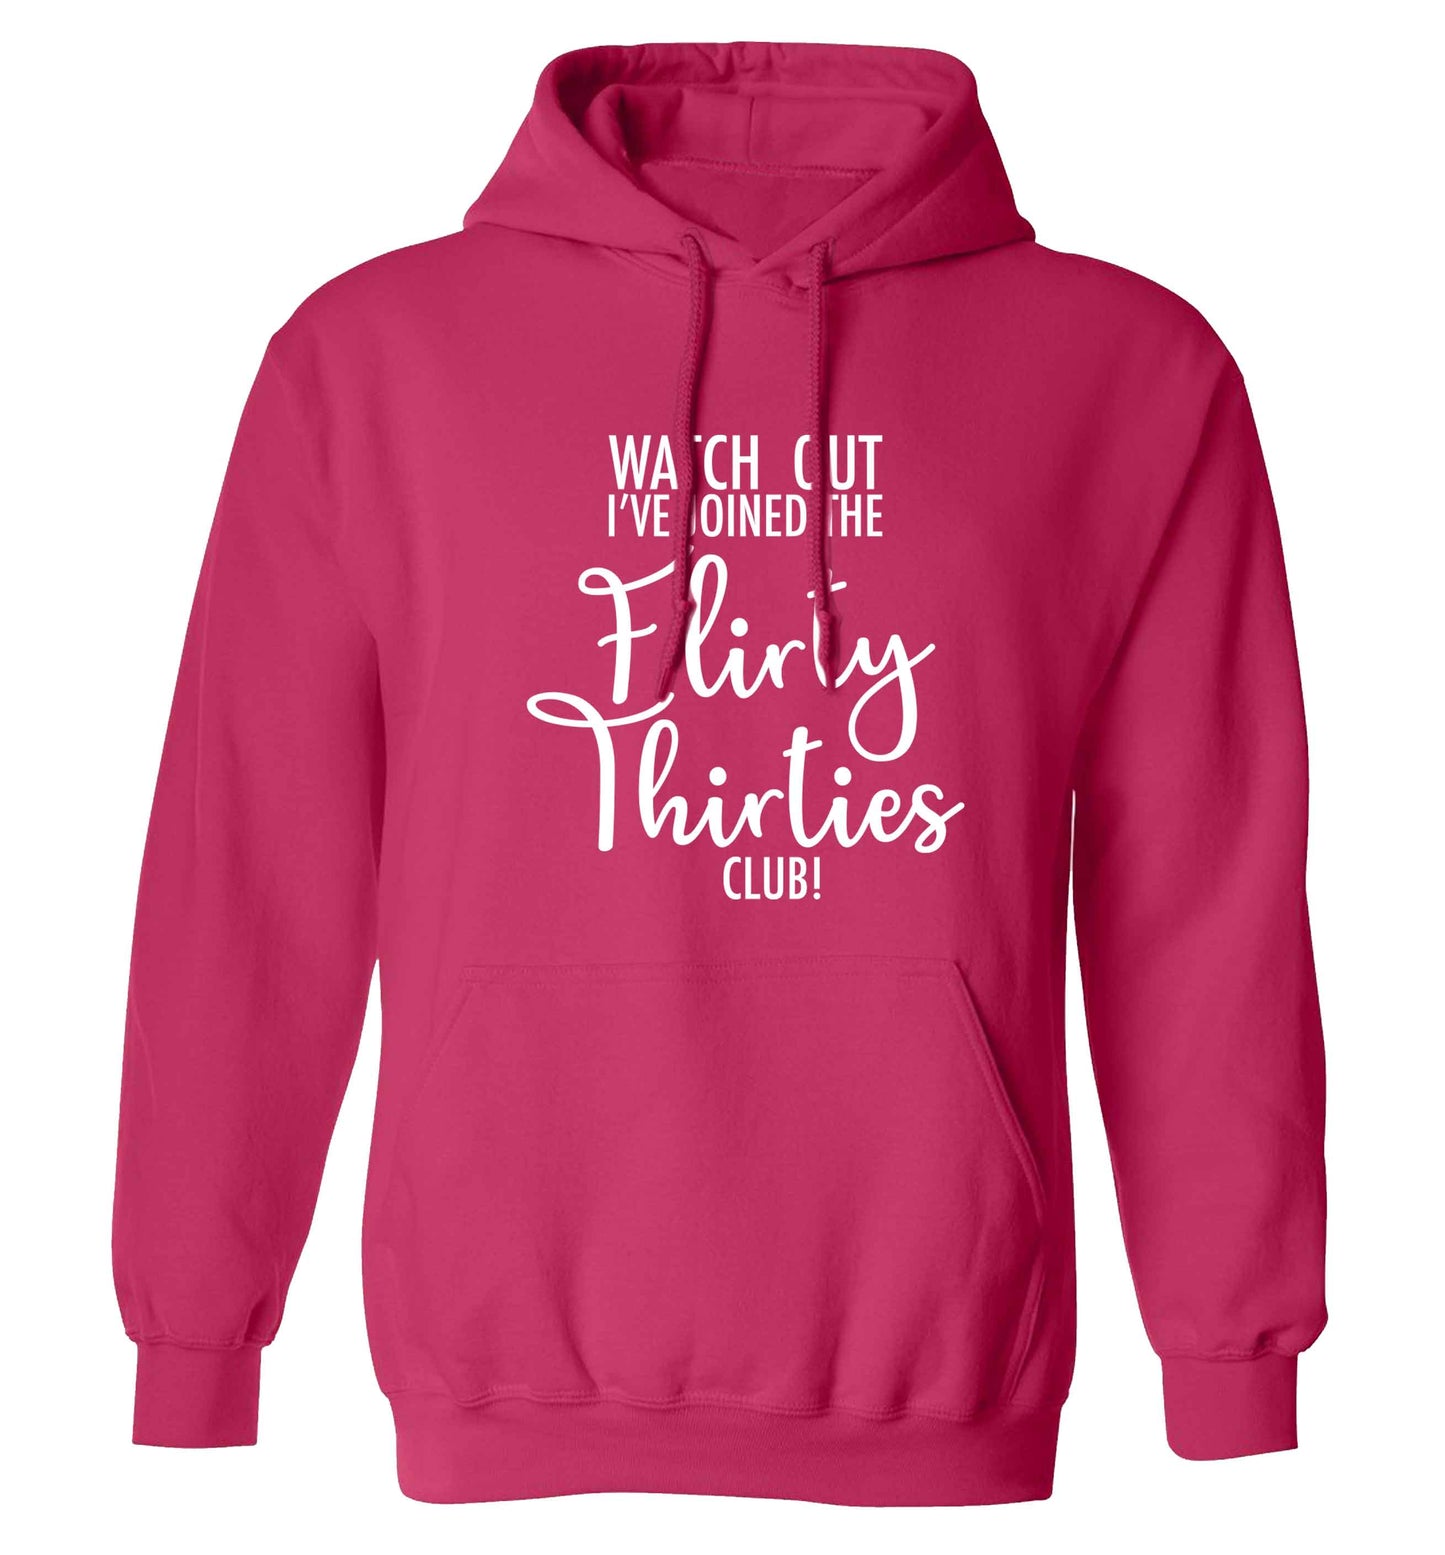 Watch out I've joined the flirty thirties club adults unisex pink hoodie 2XL